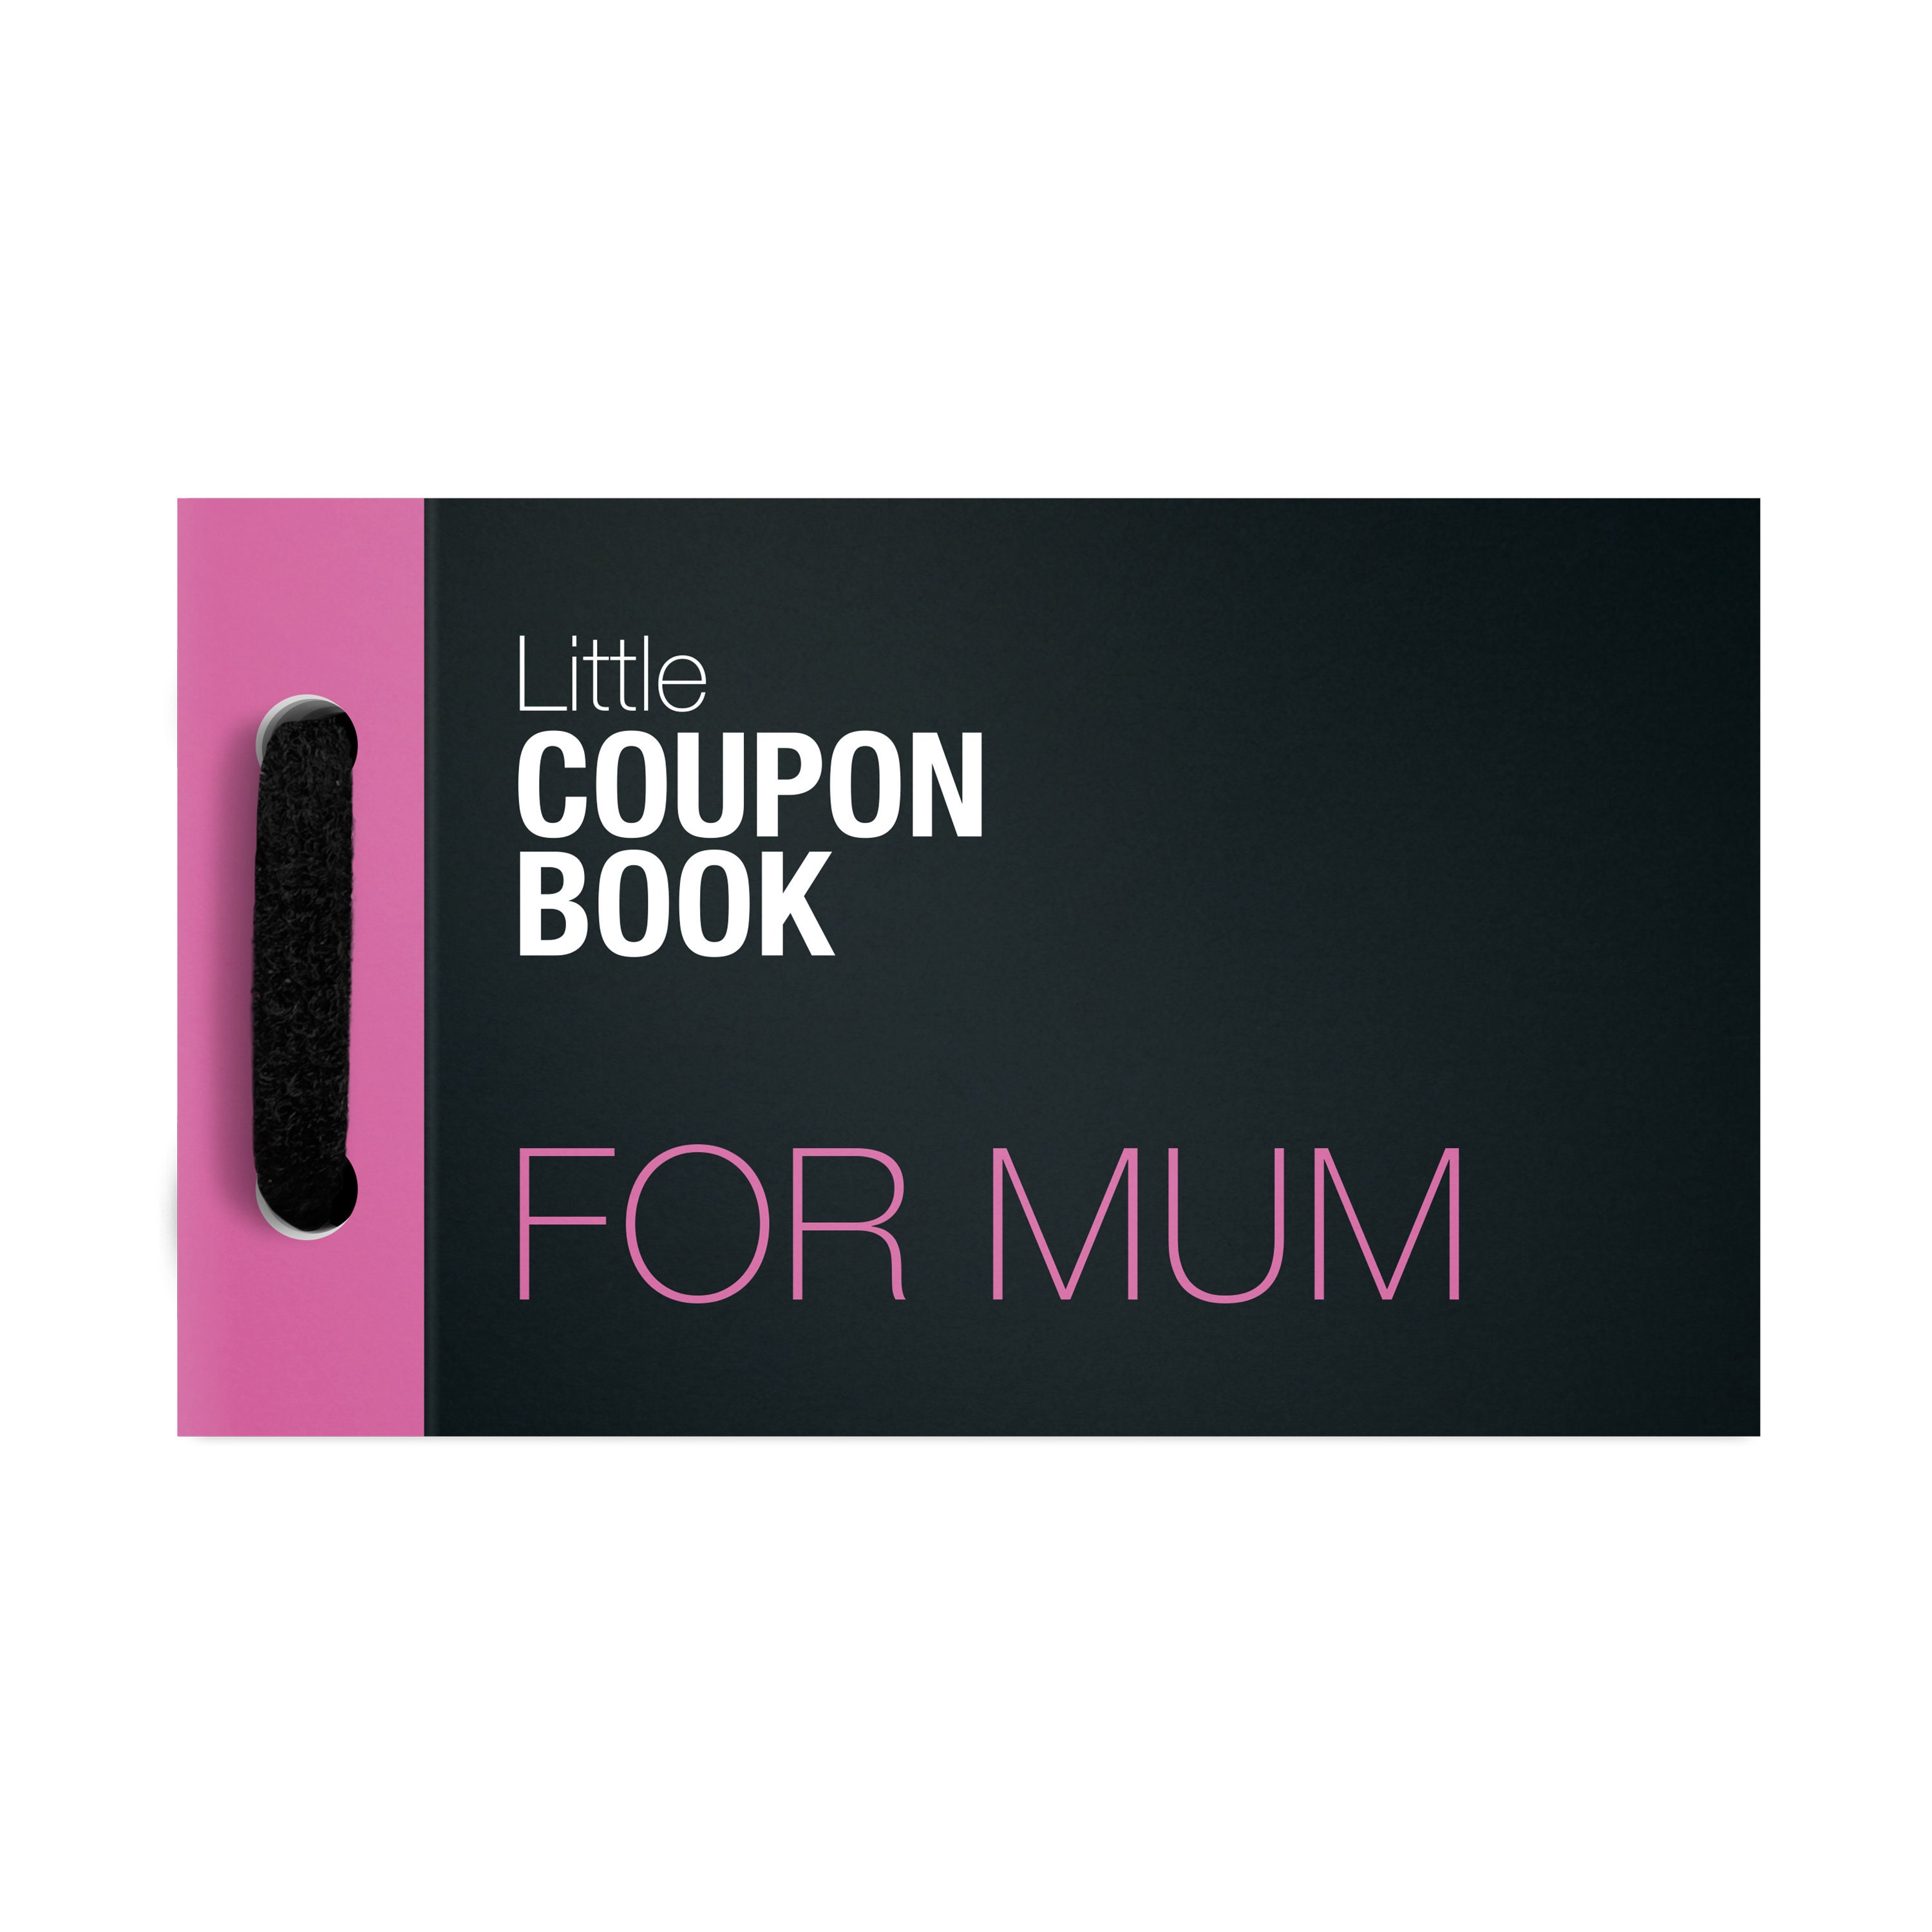 Details about   Personalised Mothers day Gifts For Her Mother Mum Mummy Mam Nanny Nan Present 